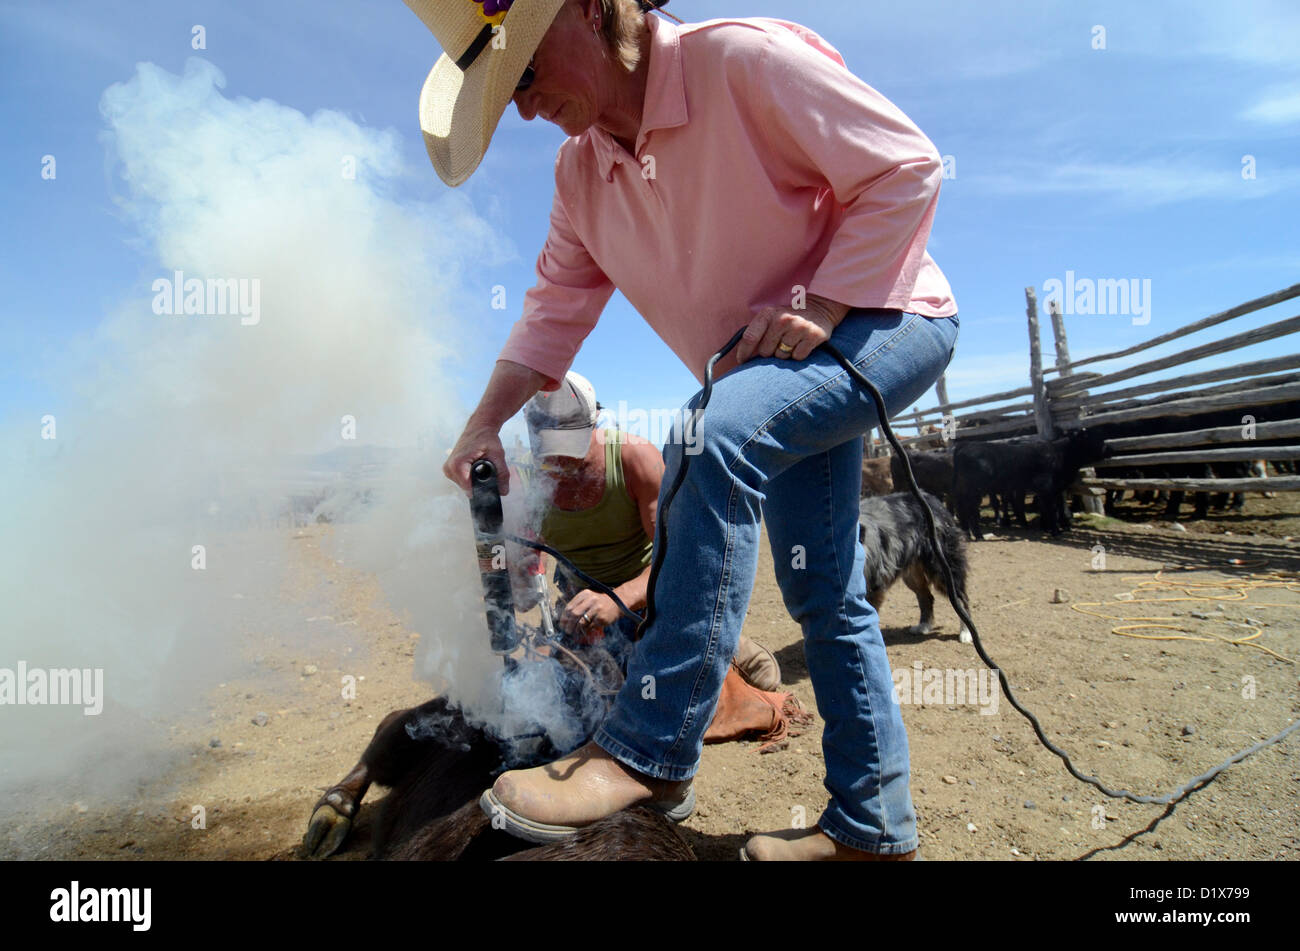 A calf is branded at the Dalton Ranch in the Clover Valley, NV Stock Photo